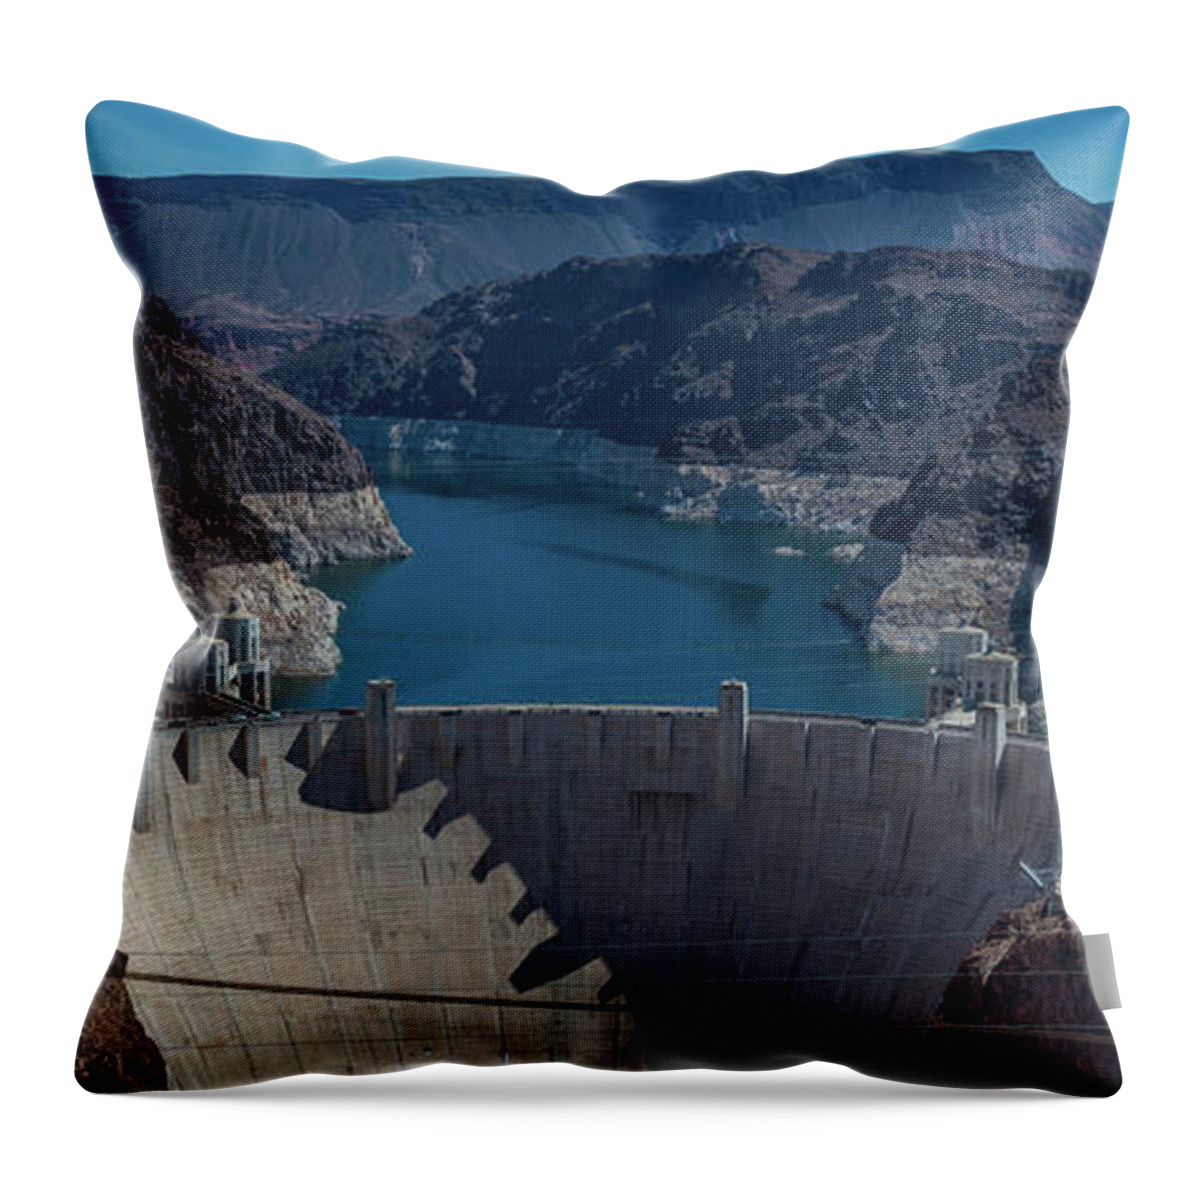 Nevada Throw Pillow featuring the photograph Hoover Dam Panorama by Michael Ver Sprill